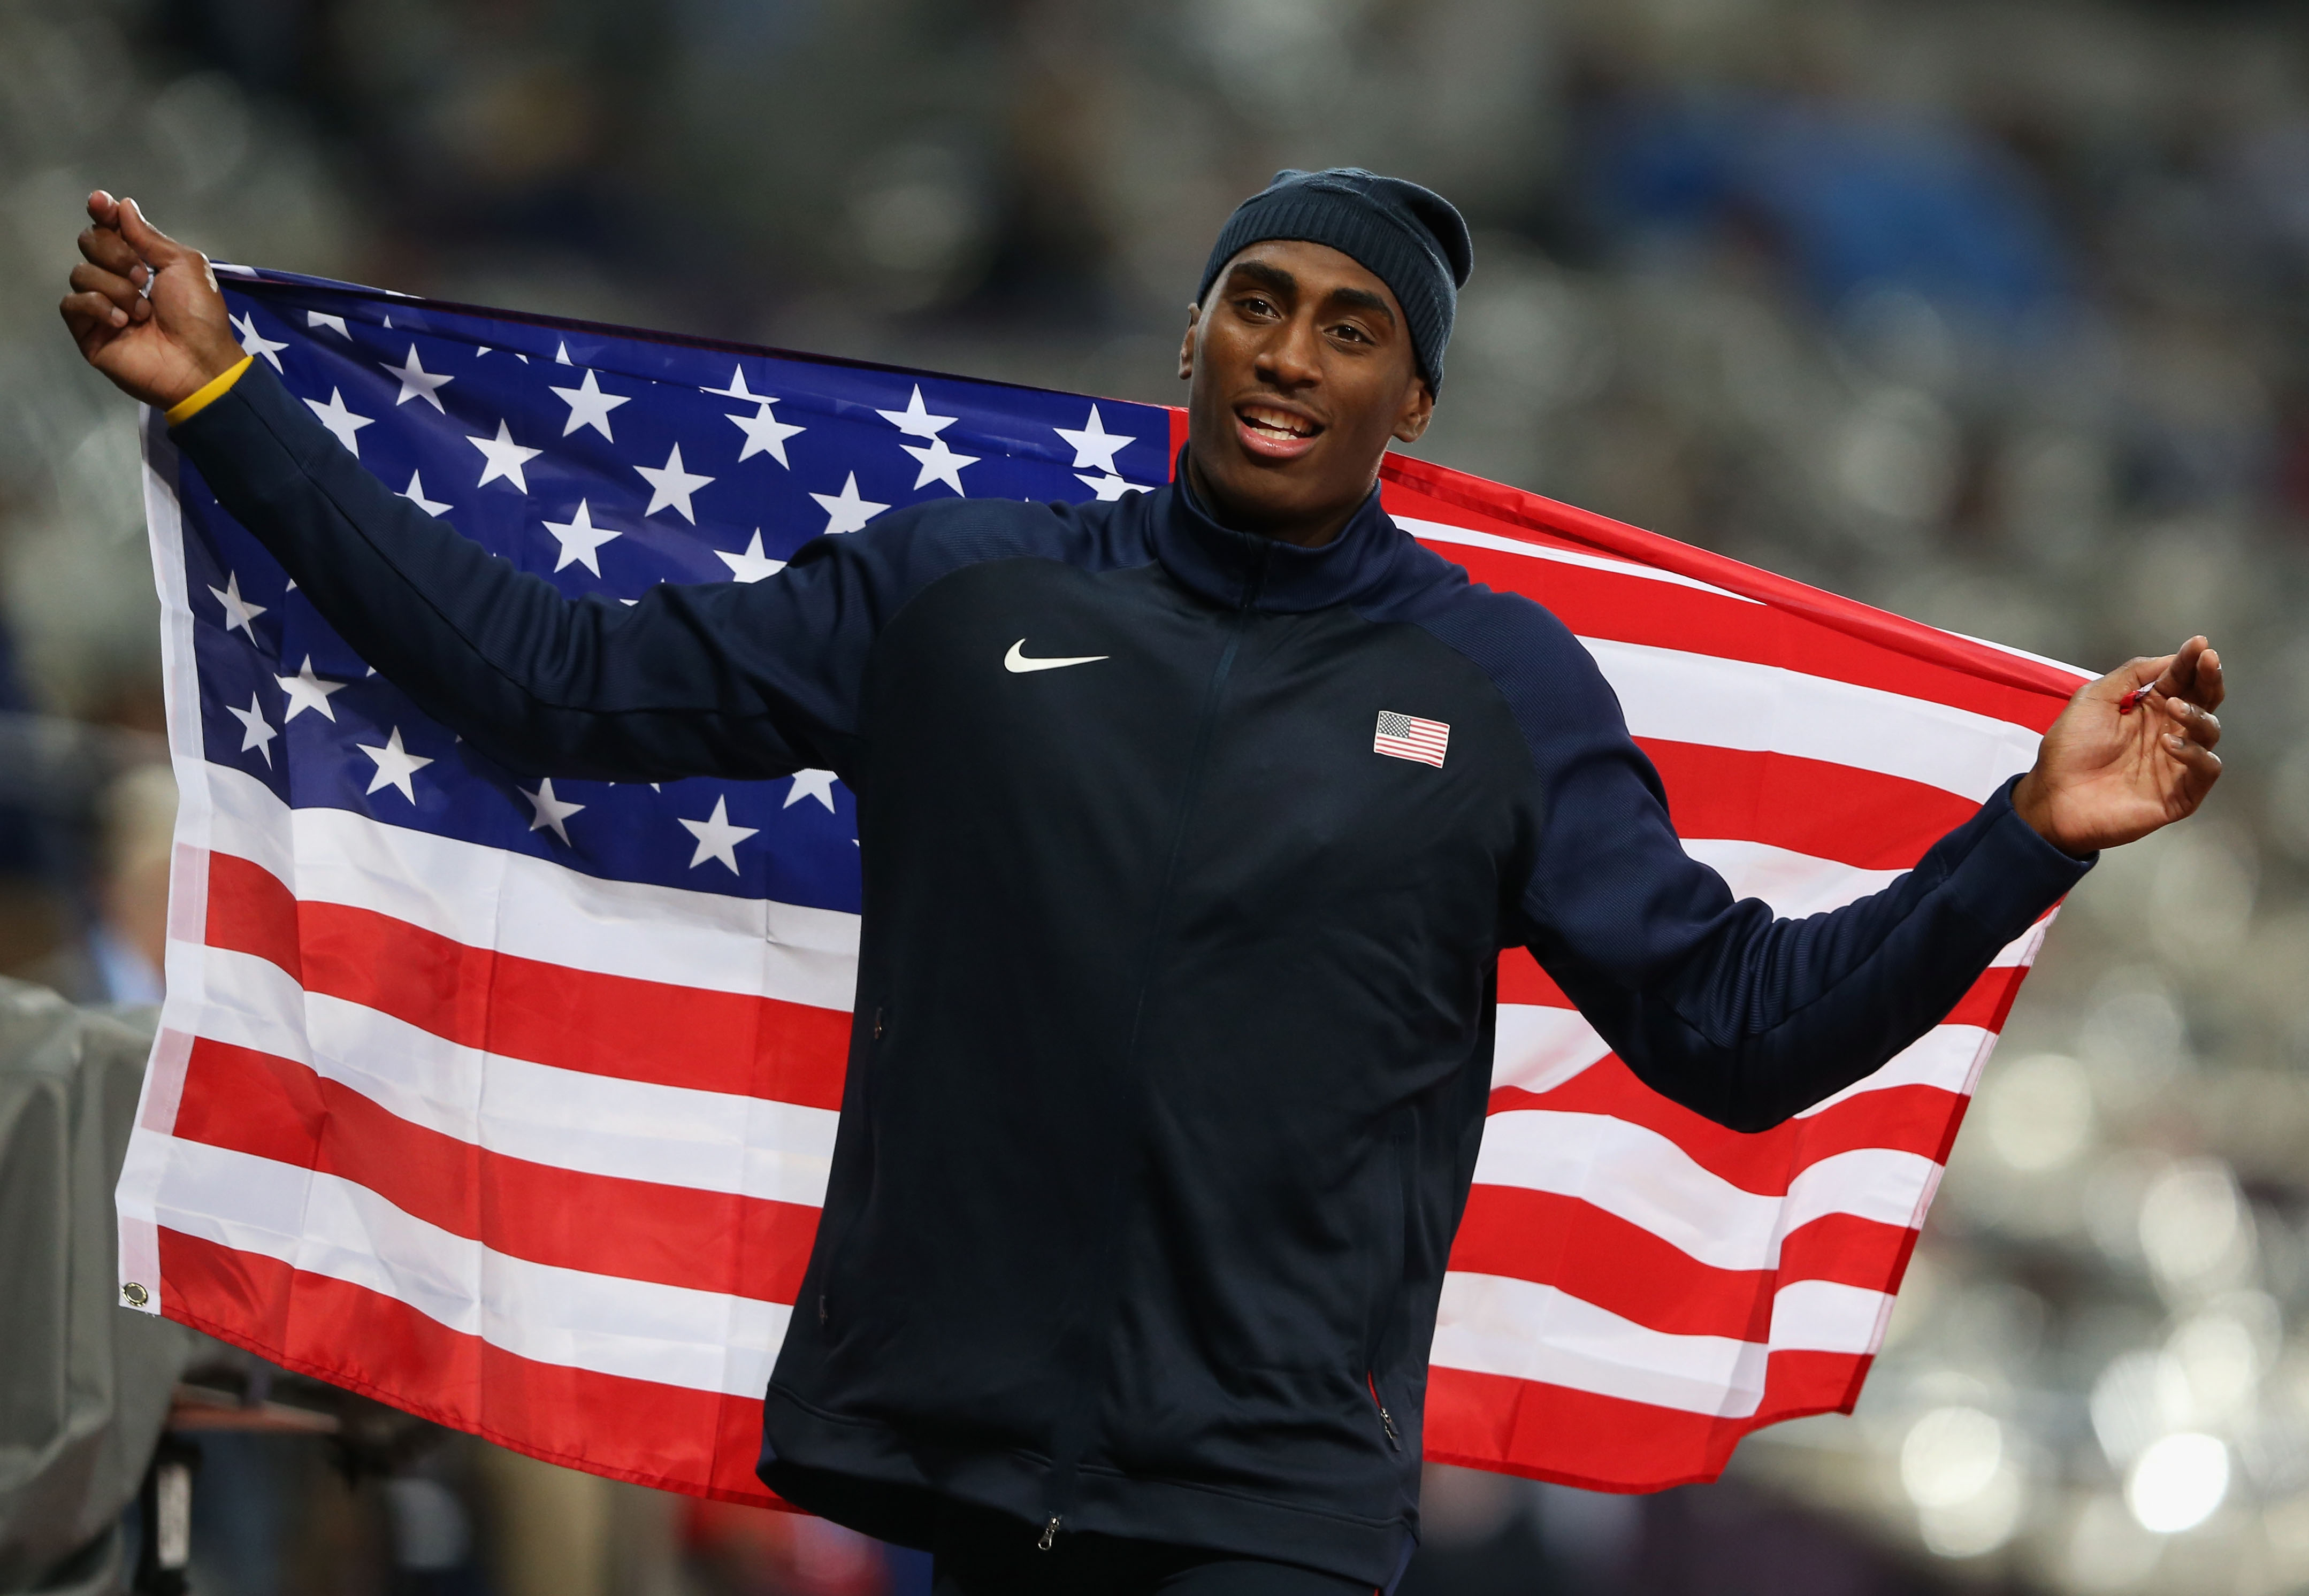 American high jumper wins 2012 gold medal after doping